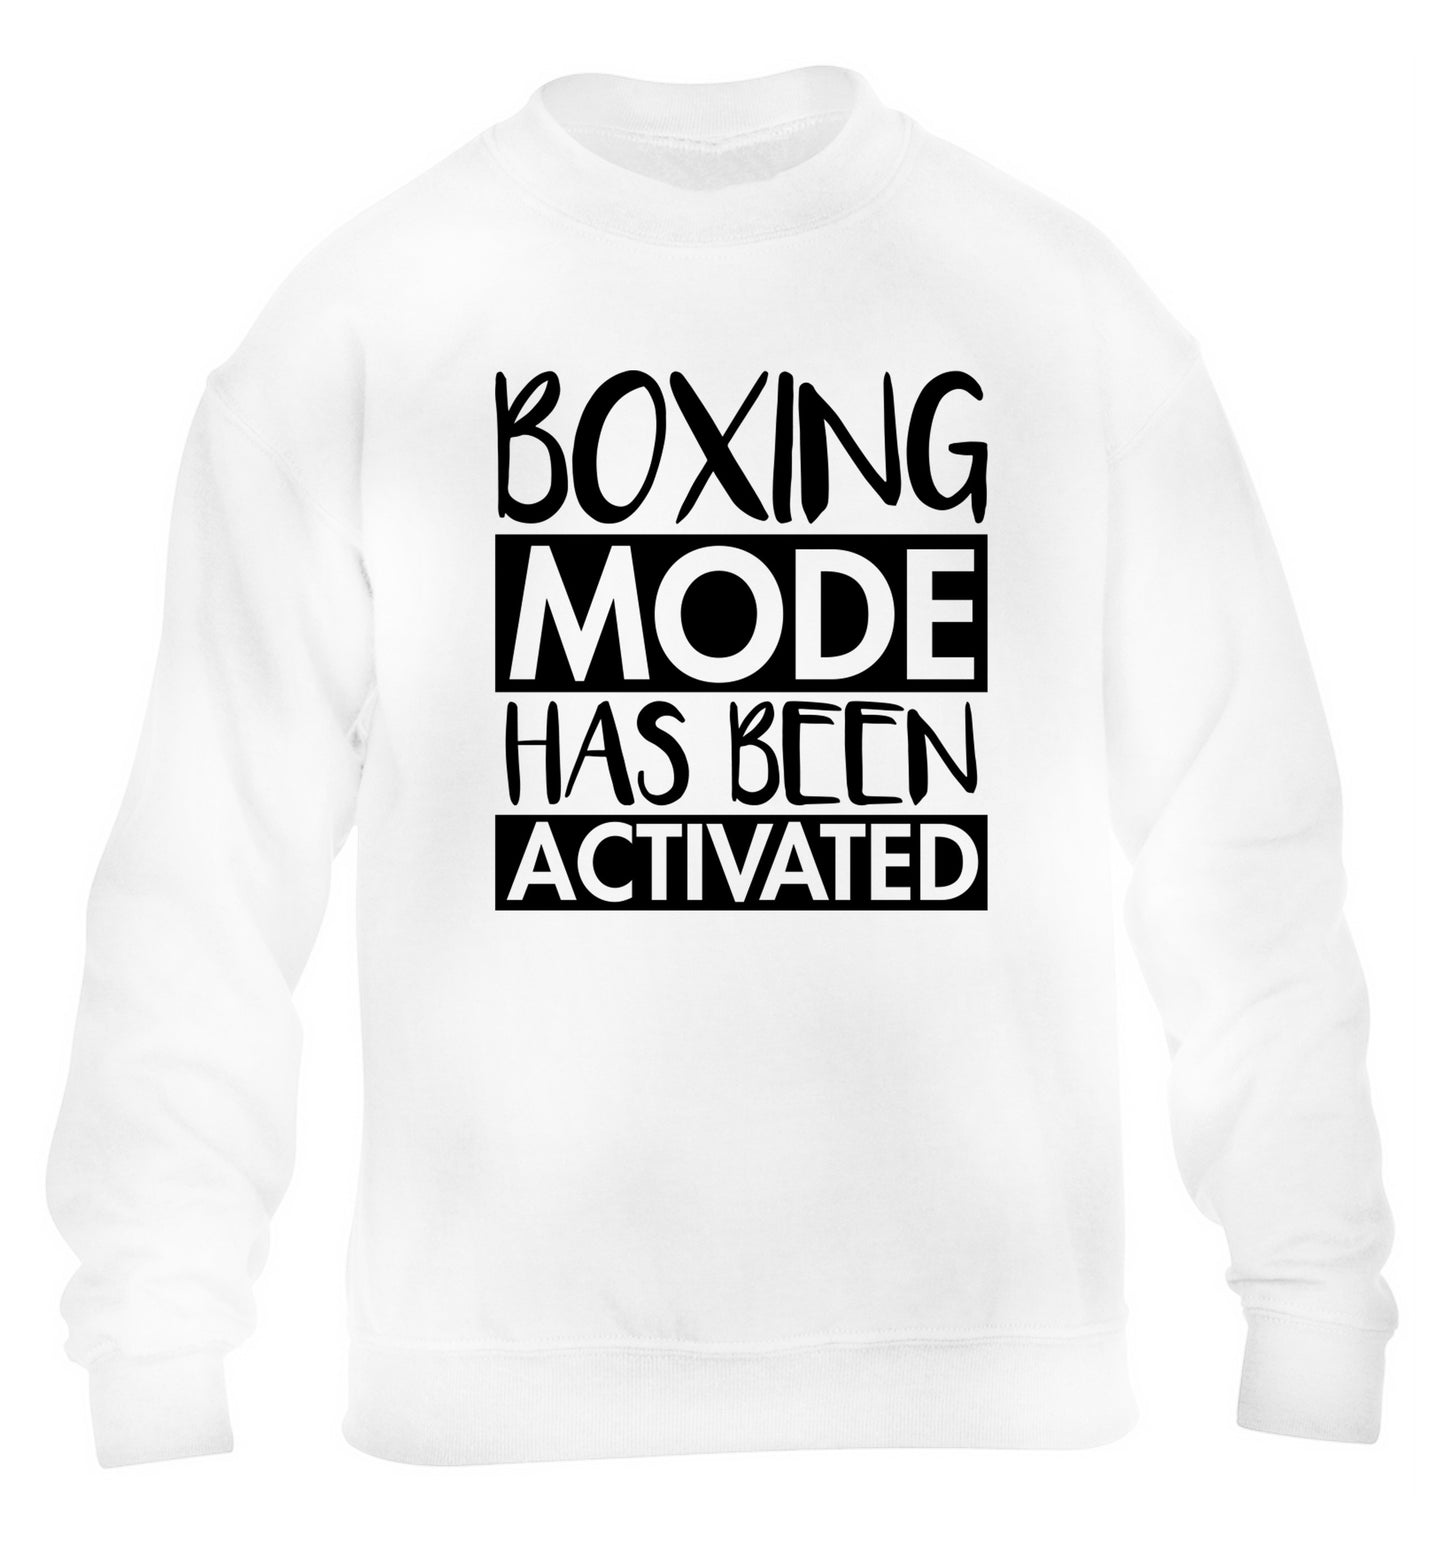 Boxing mode activated children's white sweater 12-14 Years